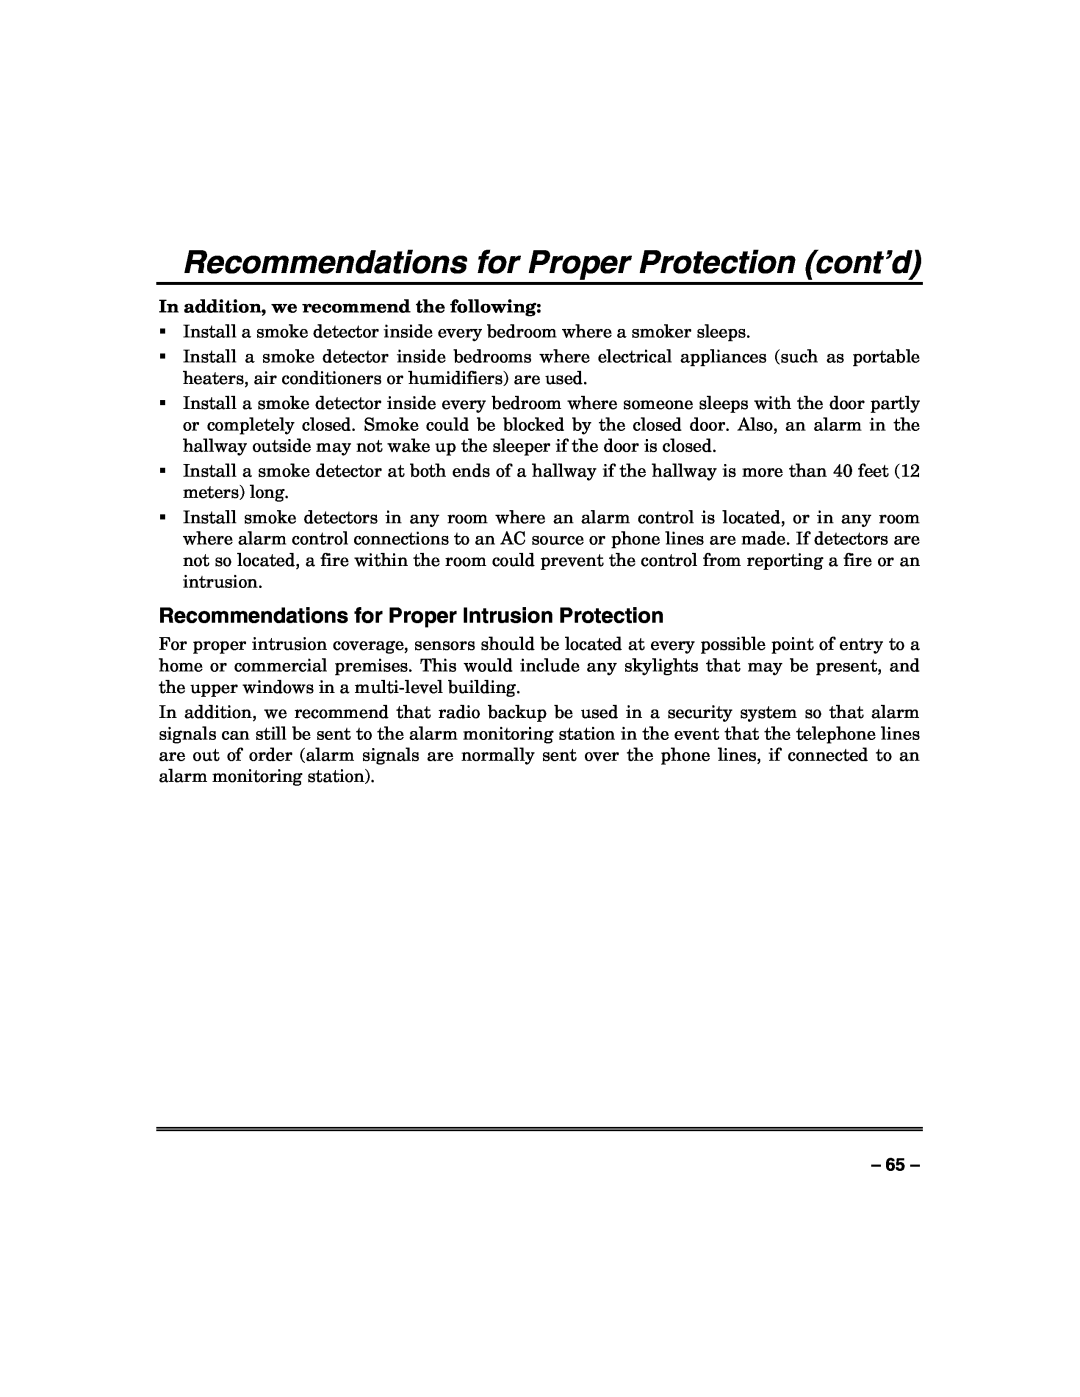 Honeywell 128BPTSIA manual Recommendations for Proper Protection cont’d, Recommendations for Proper Intrusion Protection 